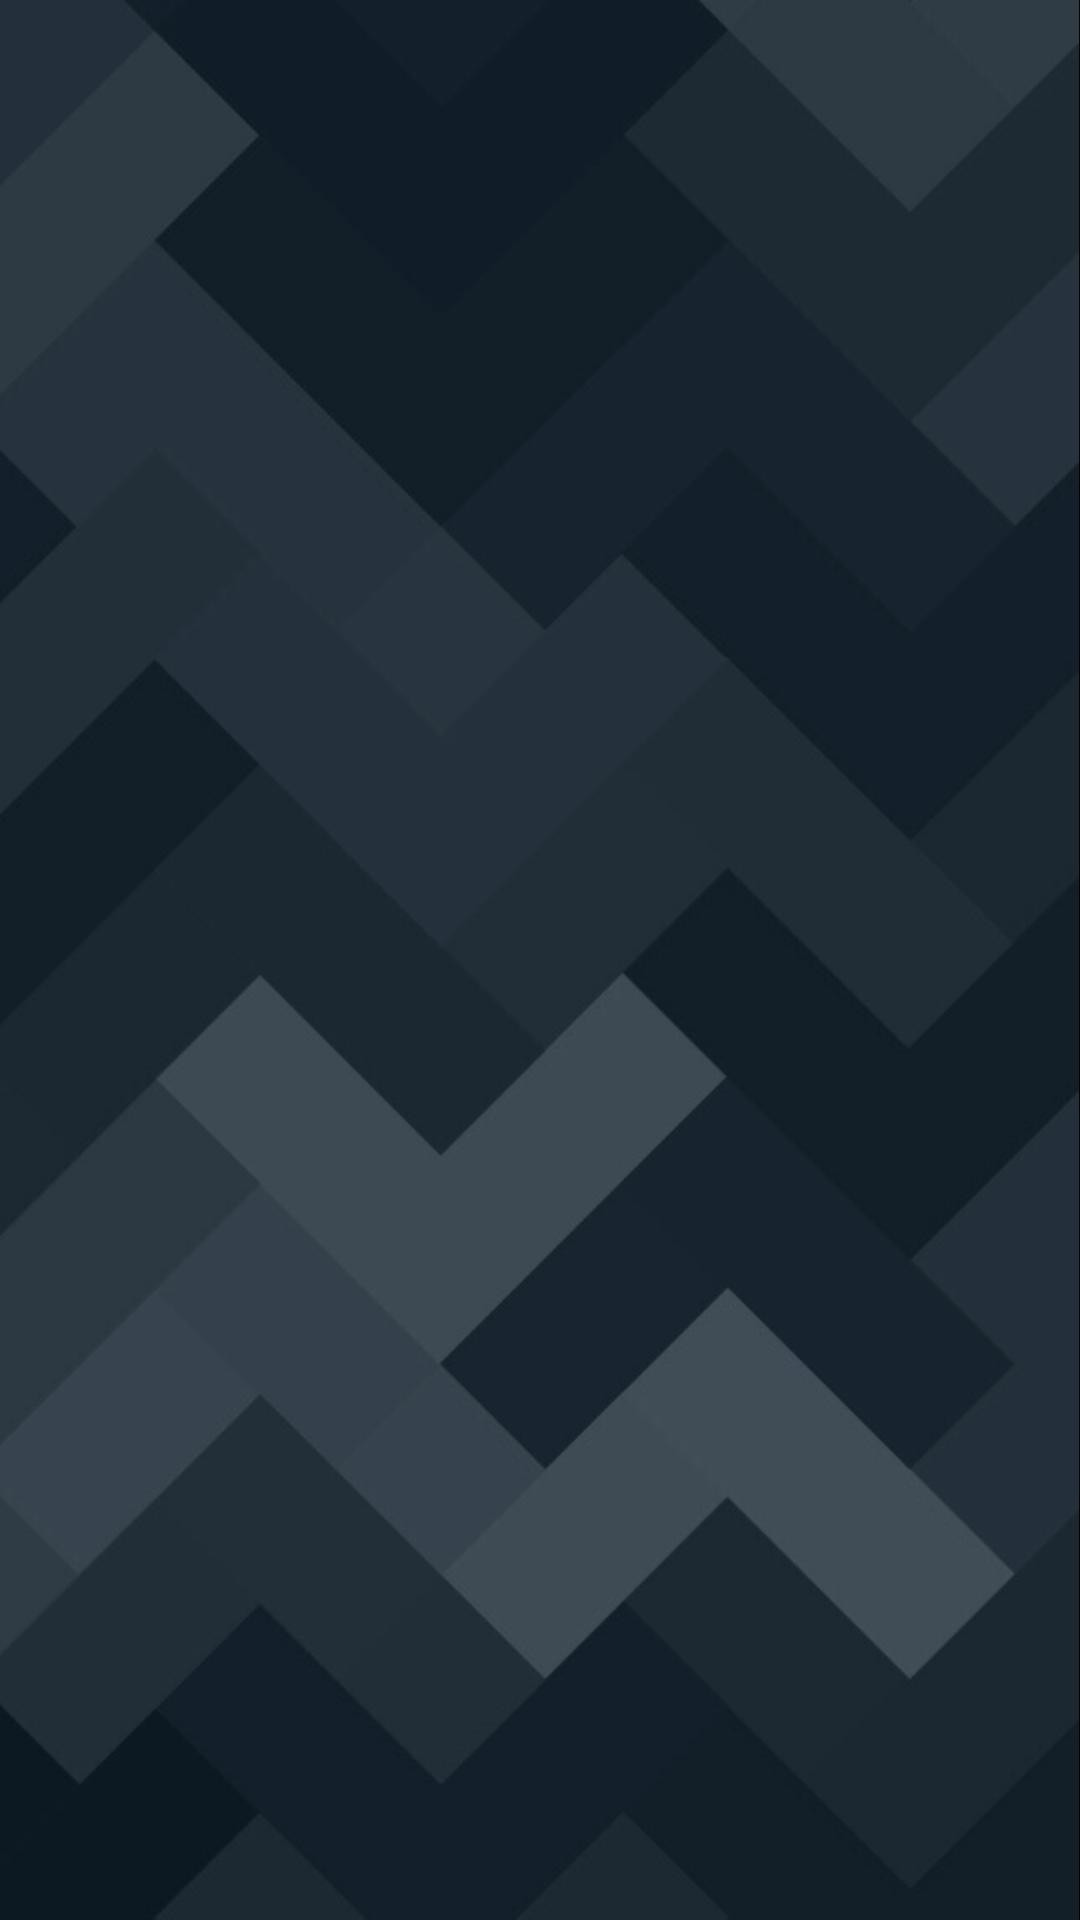 1080x1920 Simple-Black-Grey-Shapes-Pattern-Tap-to-see-